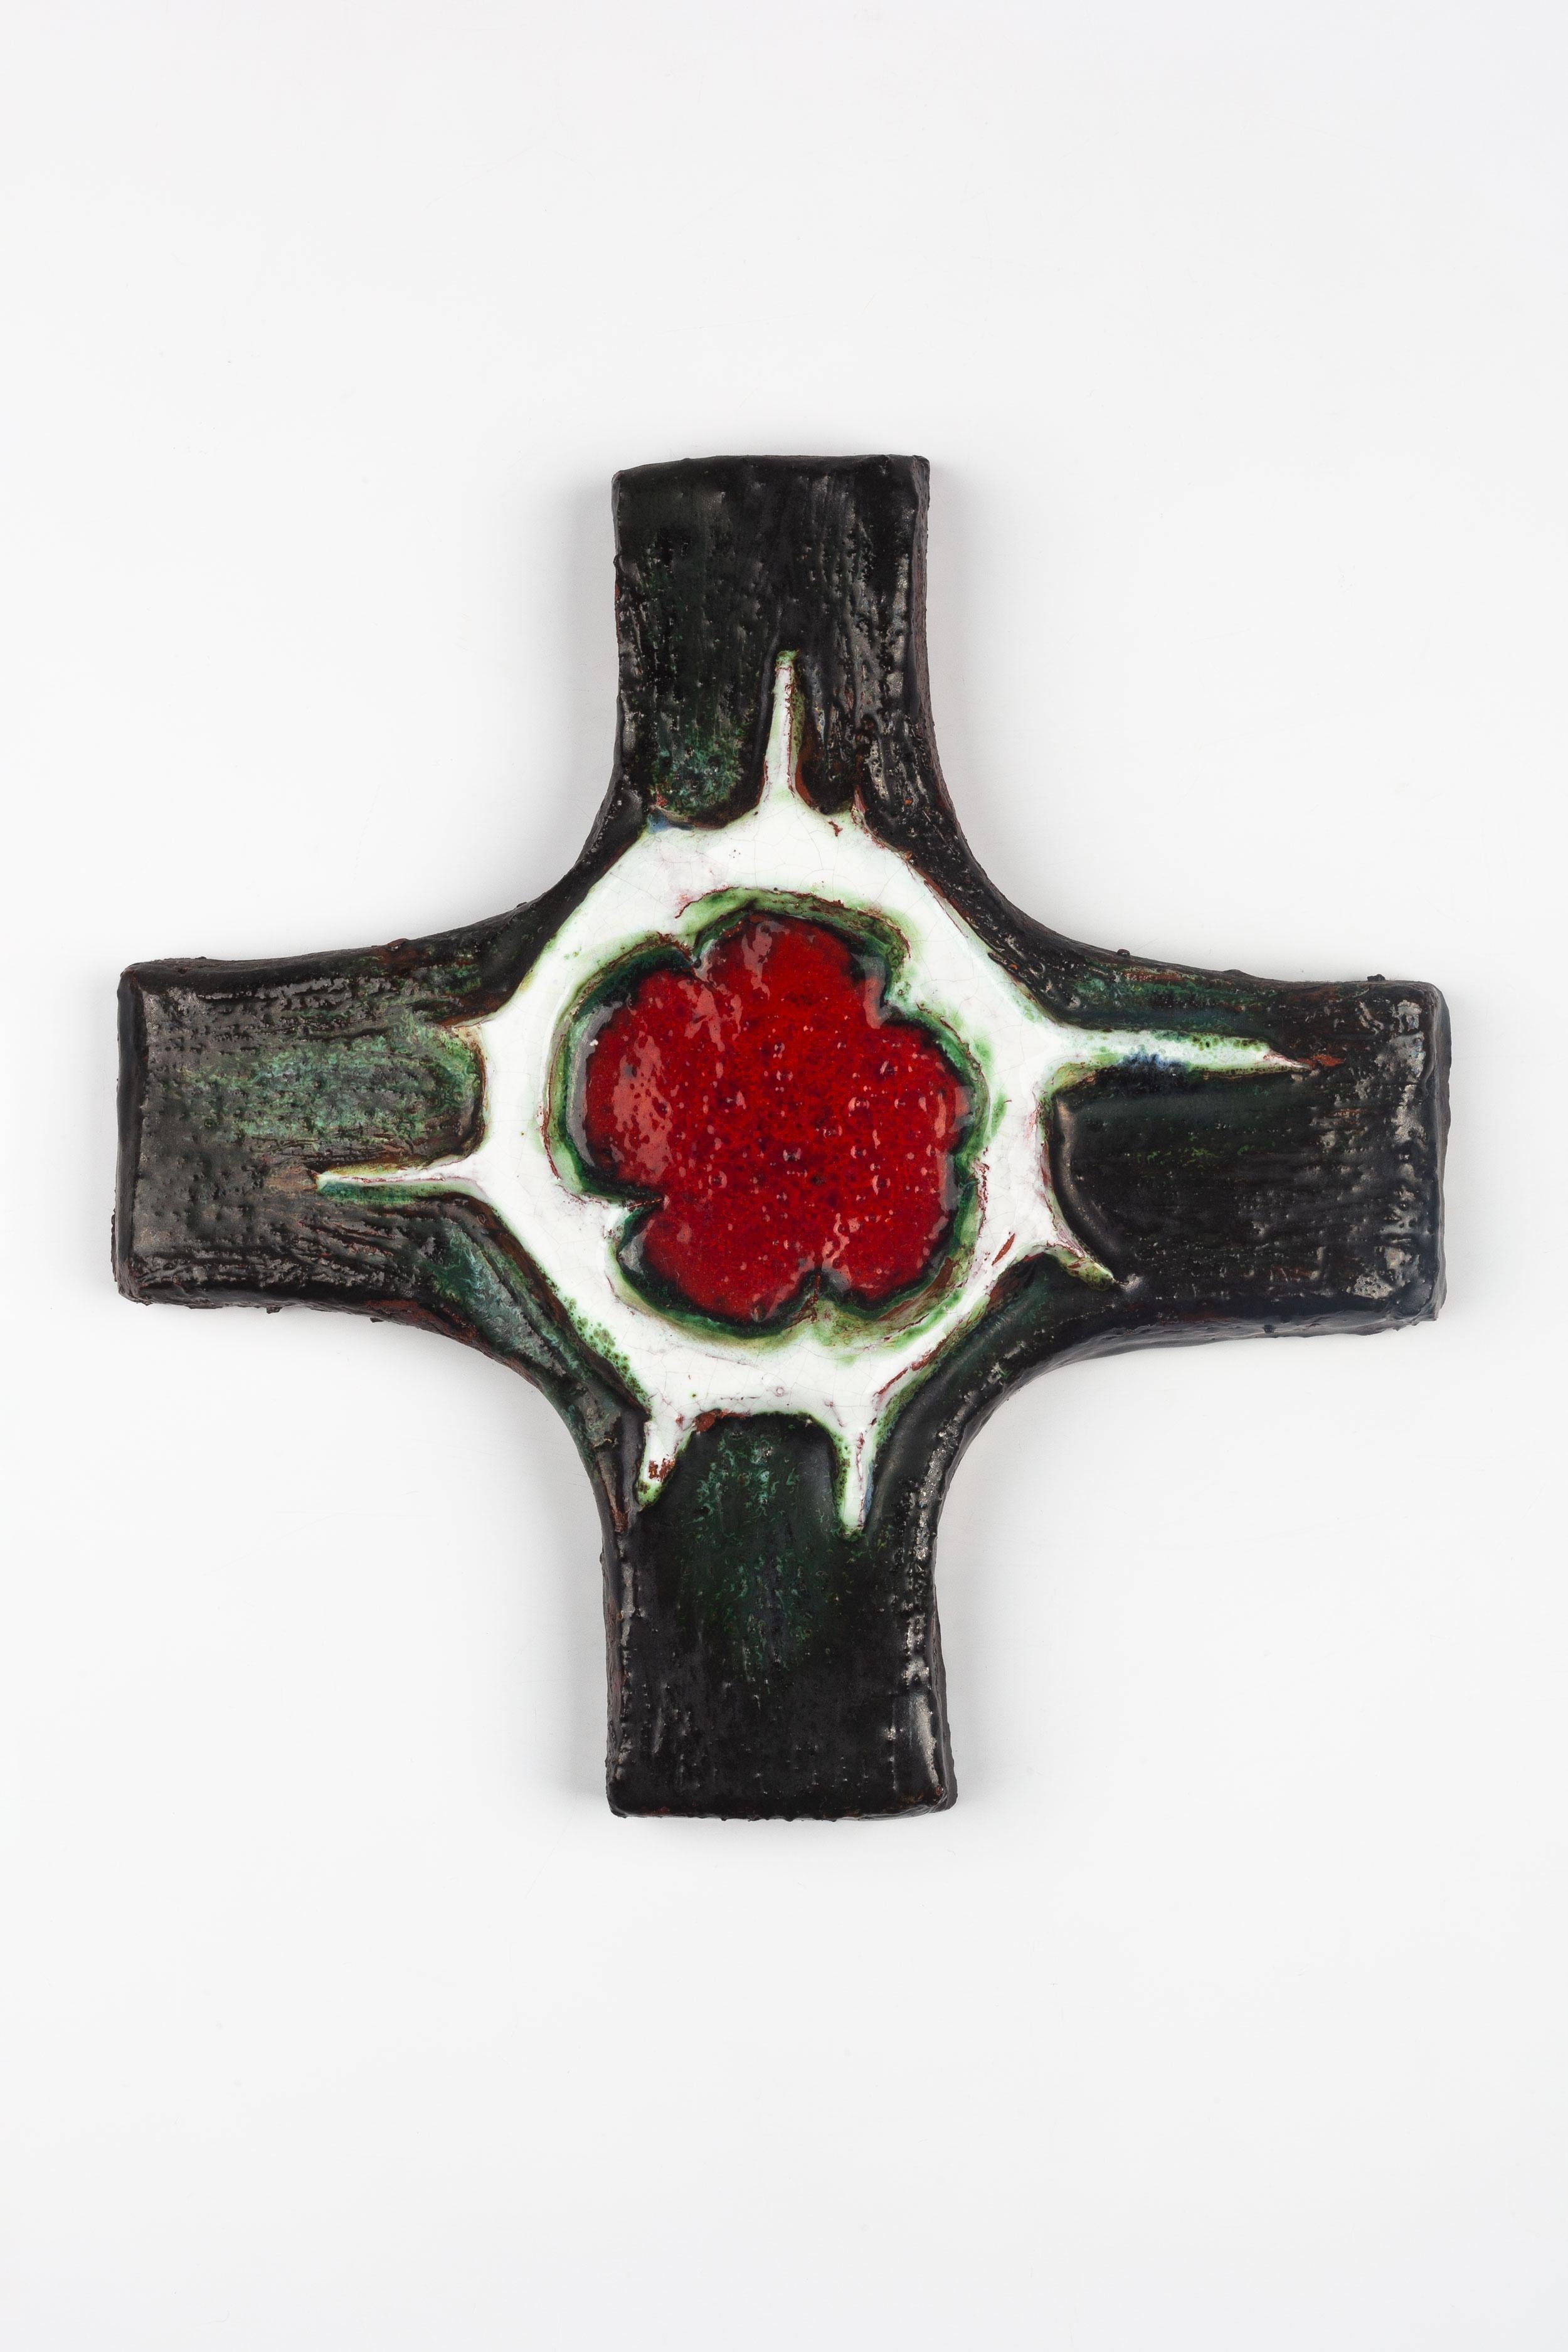 Midcentury European ceramic wall cross in green textured ceramic with white central circle in organic volumes and filled with the color red. From a large collection of crosses handmade by Flemish artisans.

From modernism to brutalism, the crosses